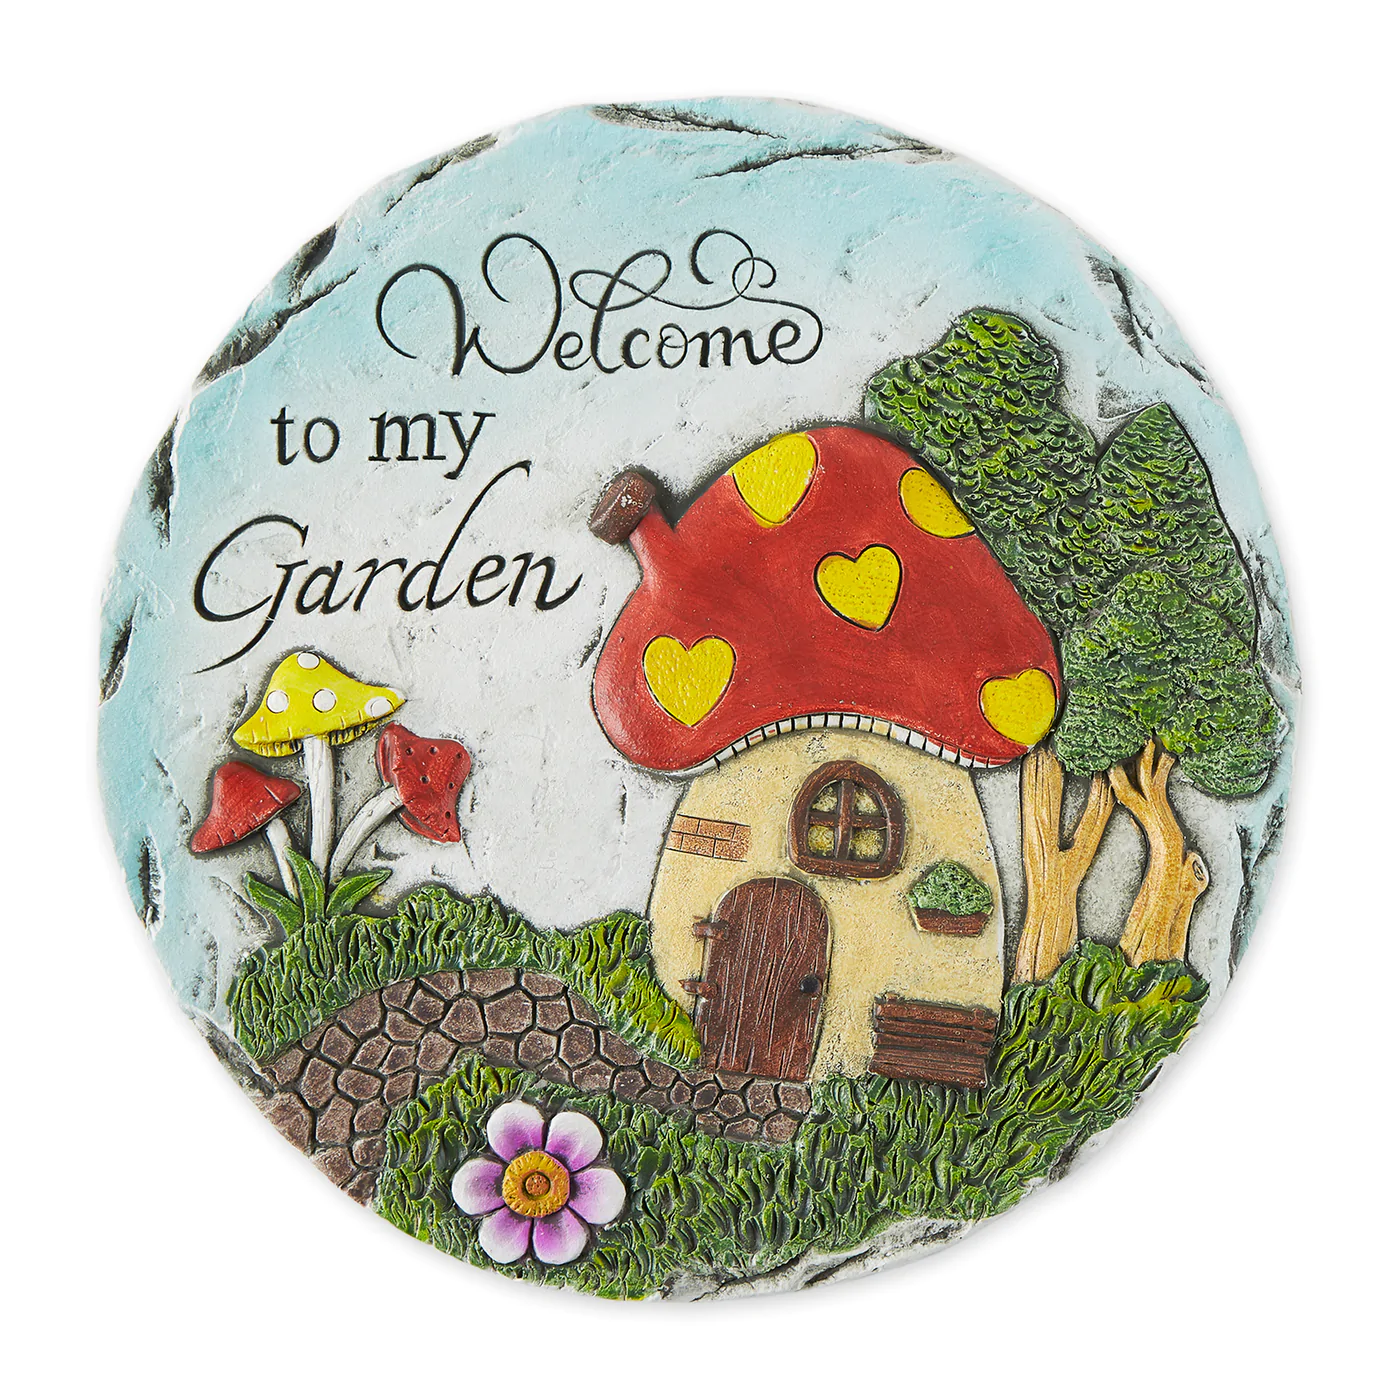 Welcome to my Garden Mushroom House Stepping Stone - $22.40